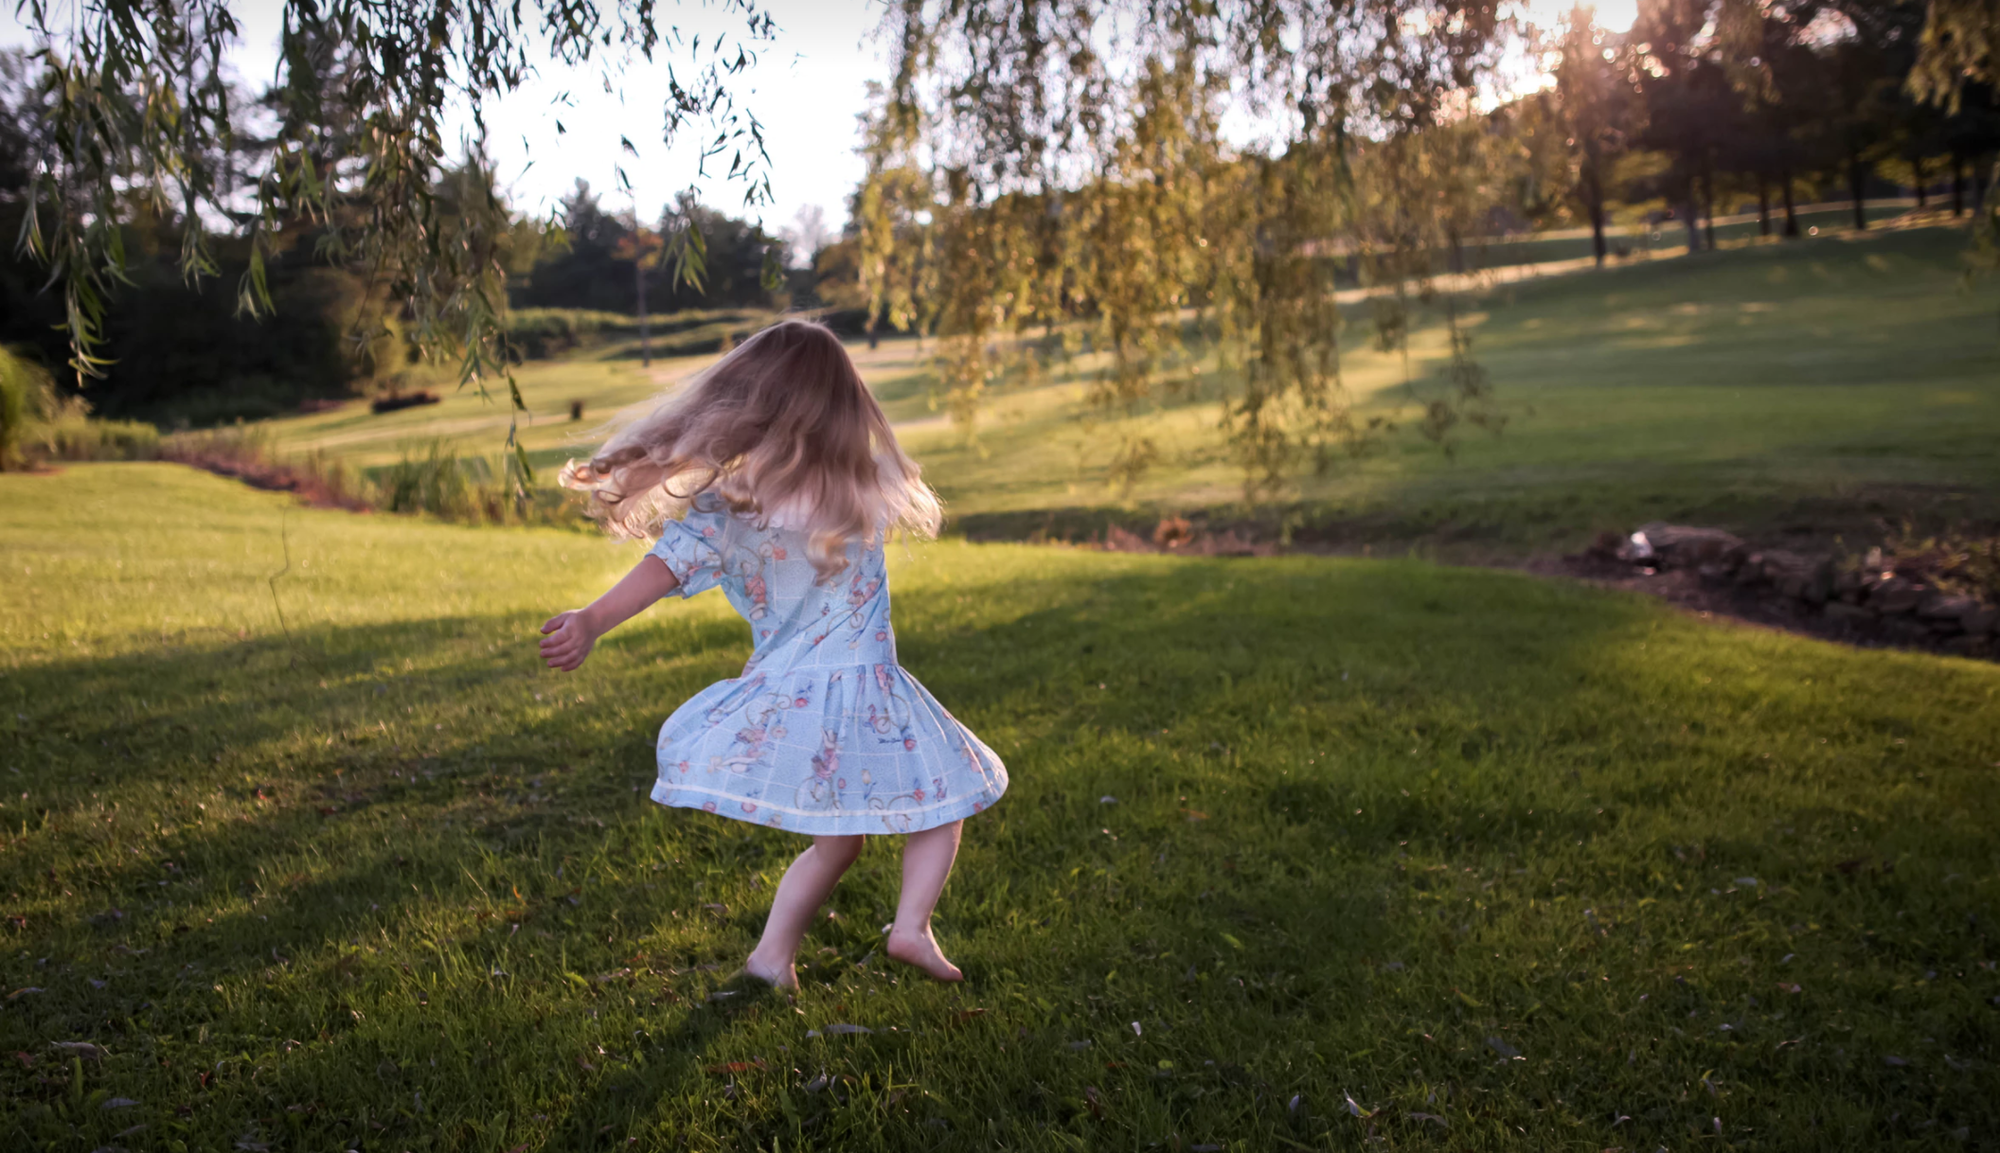 How to Take Creative and Joyful Photos of Your Children